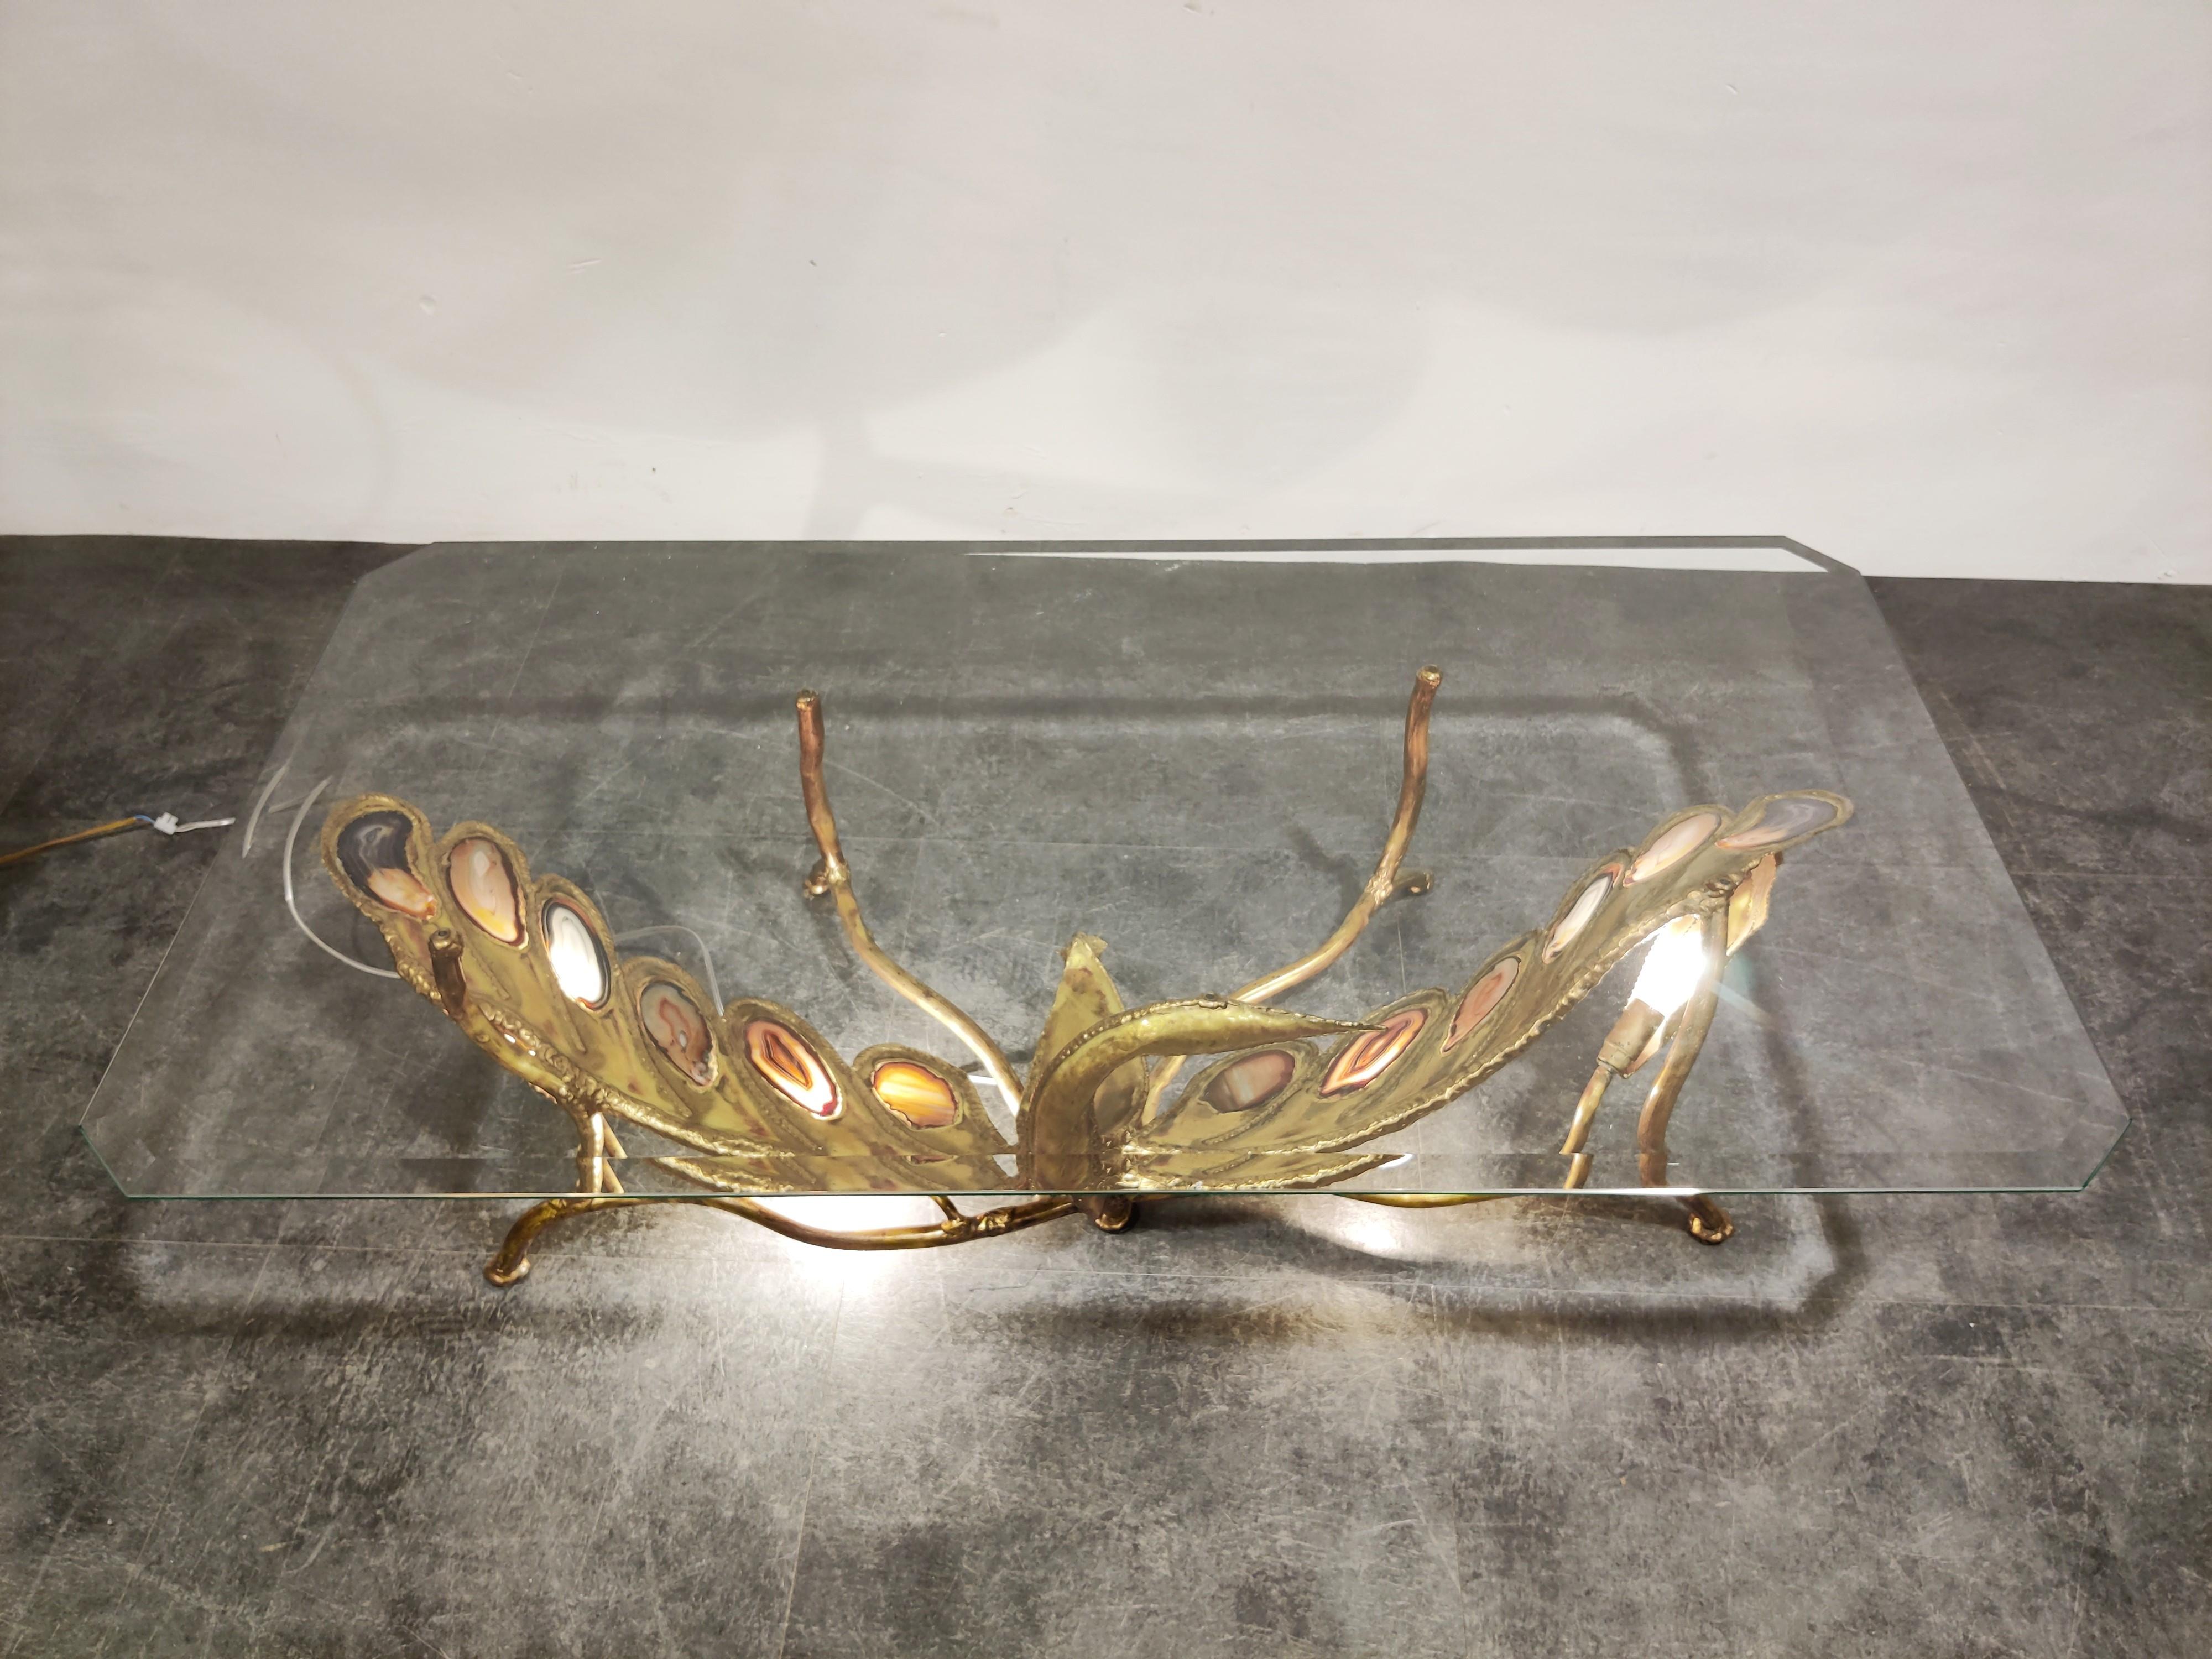 Illuminating brass and agate coffee table by Henri Fernandez

Sculptural bird design with agate detailing, featuring 3 lamp sockets and square glass top. (Glass can be customized, the shown glass is an example)

Beautifully handmade piece of art